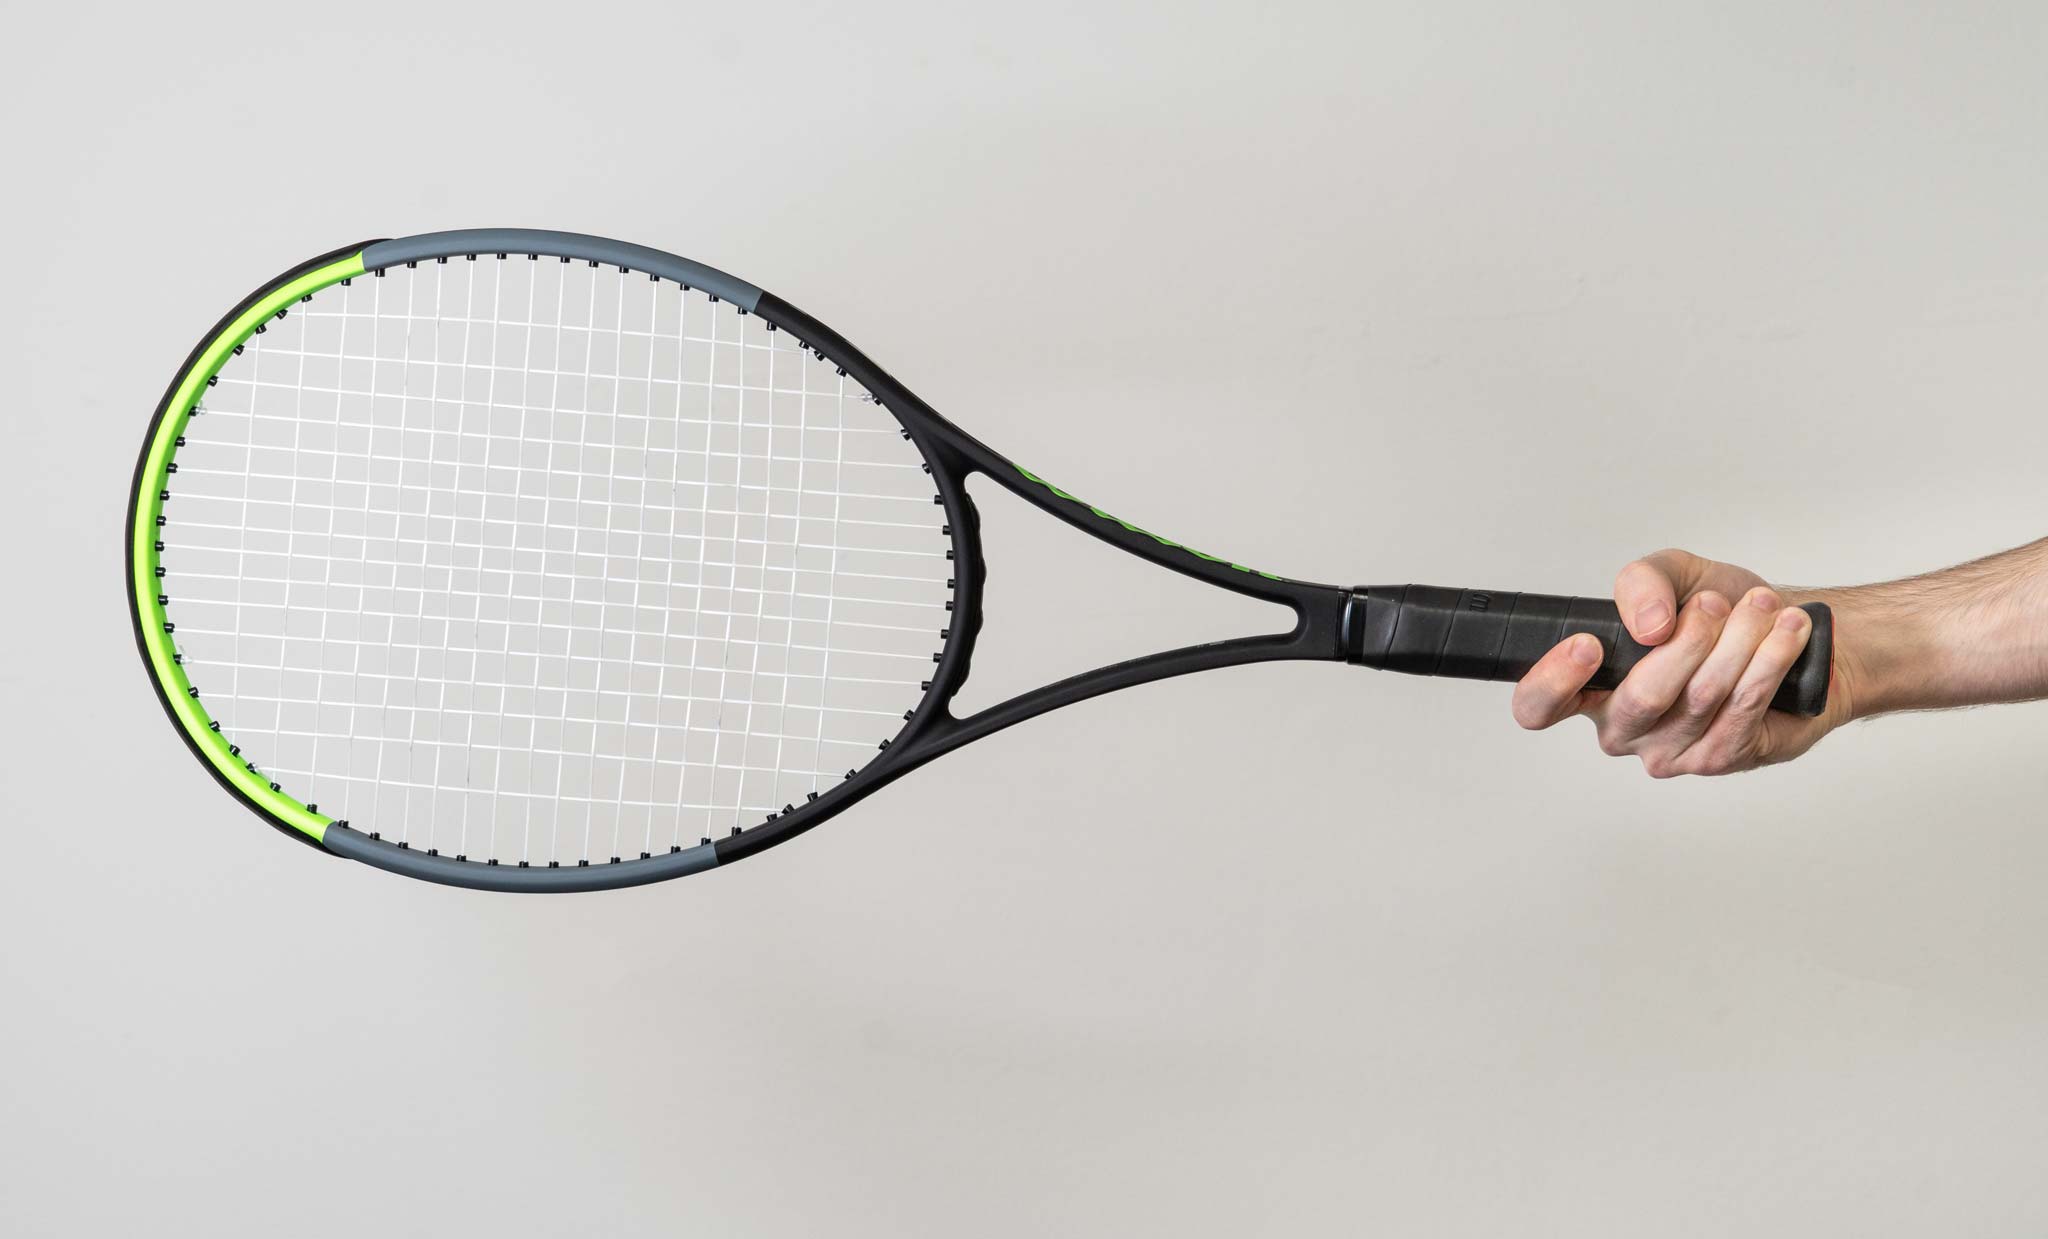 The Western Forehand Grip in Tennis - A Complete Overview